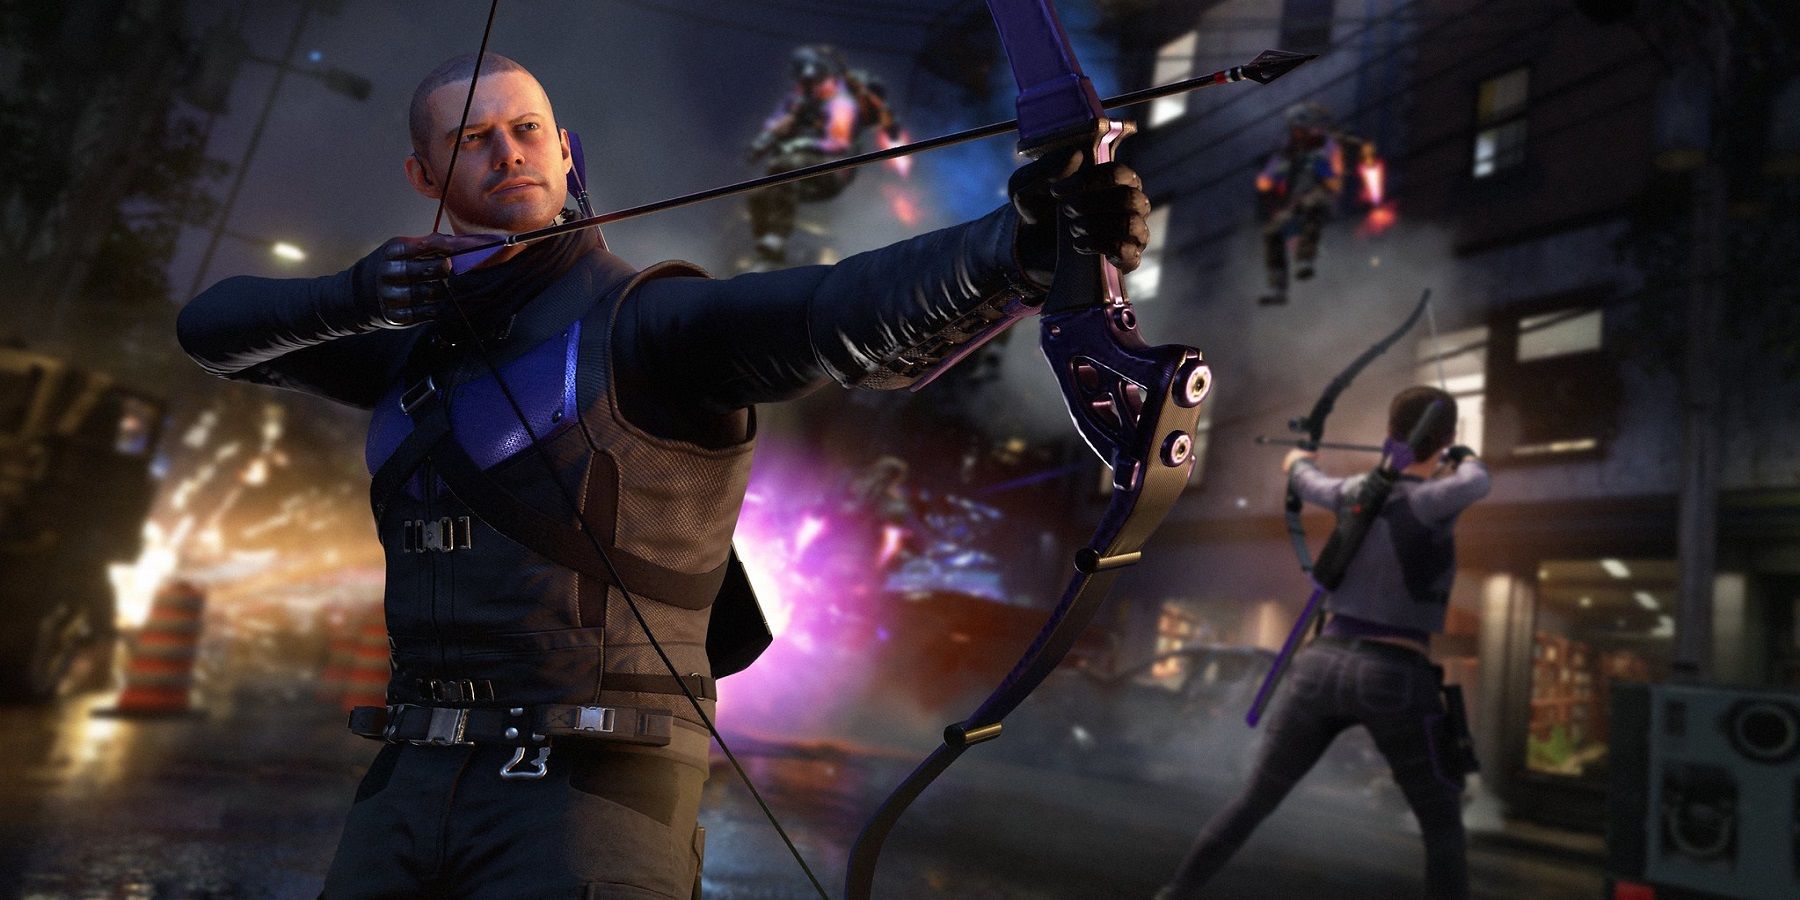 Hawkeye can now rock his suit from his early Avengers days in Marvel's Avengers.